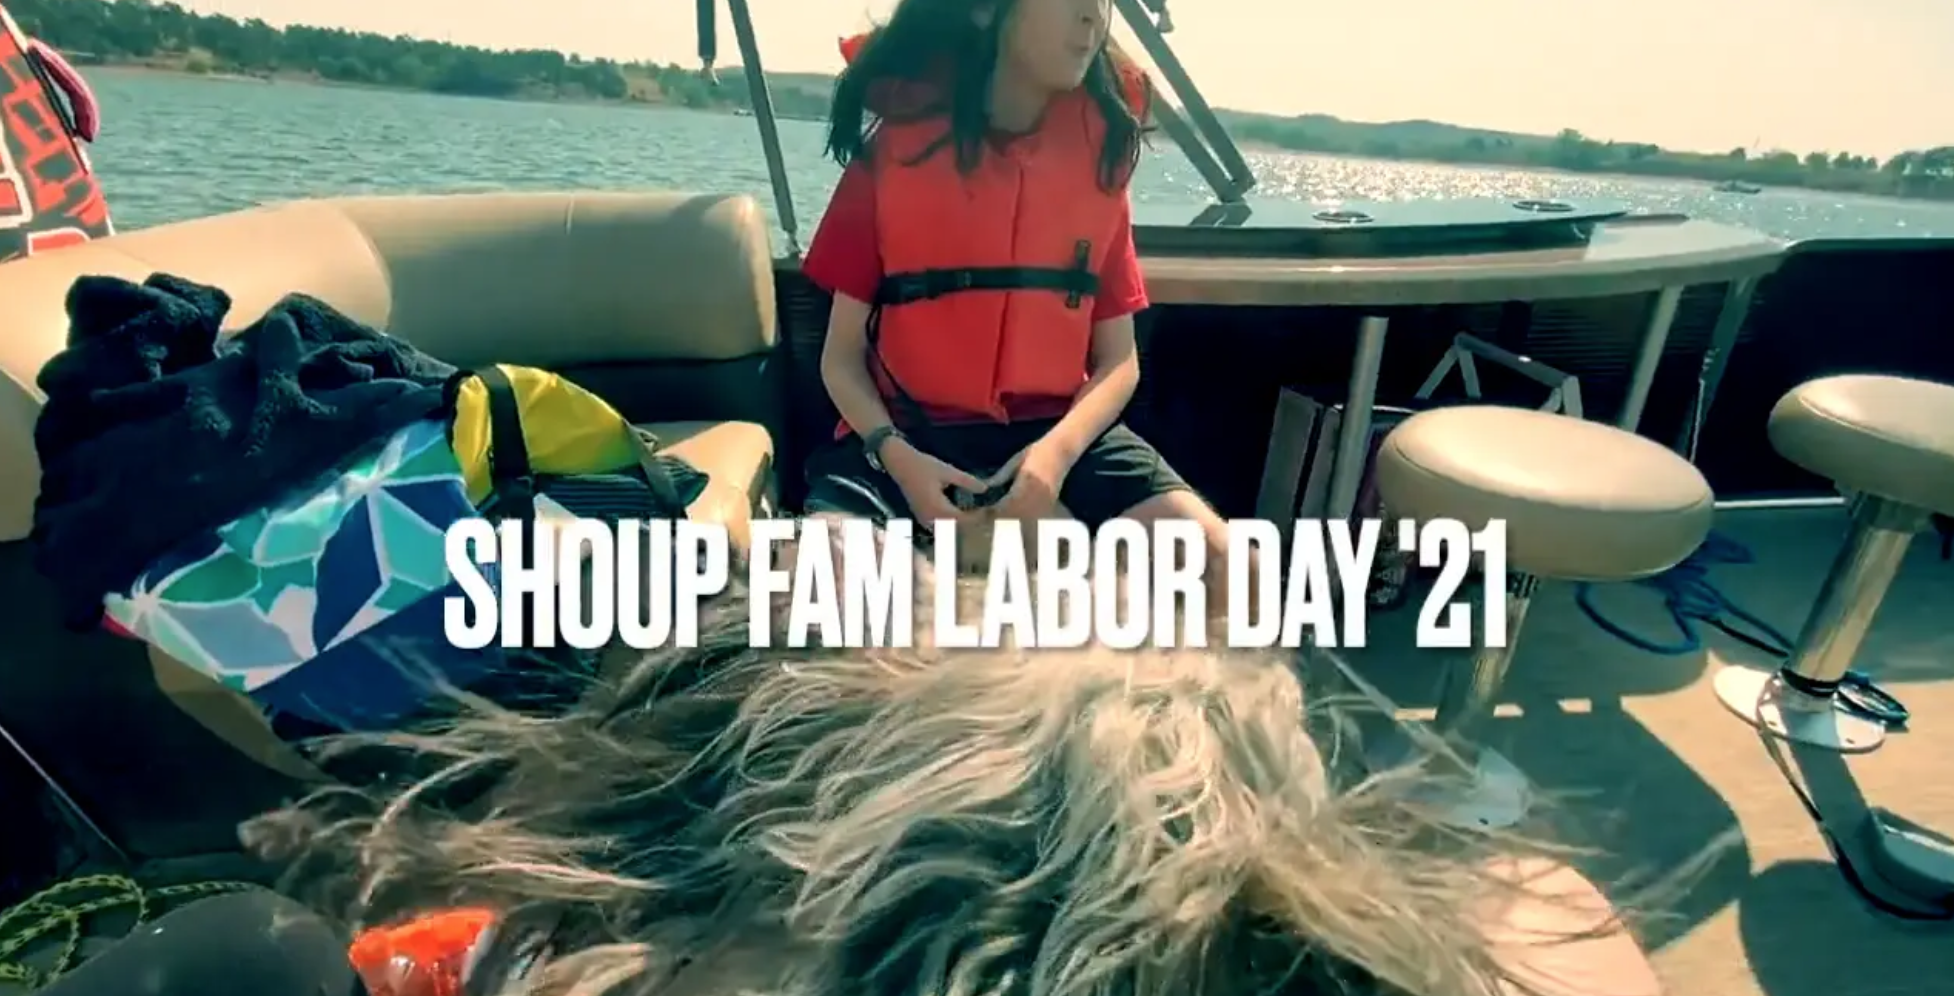 Shoup Fam Labor Day ’21